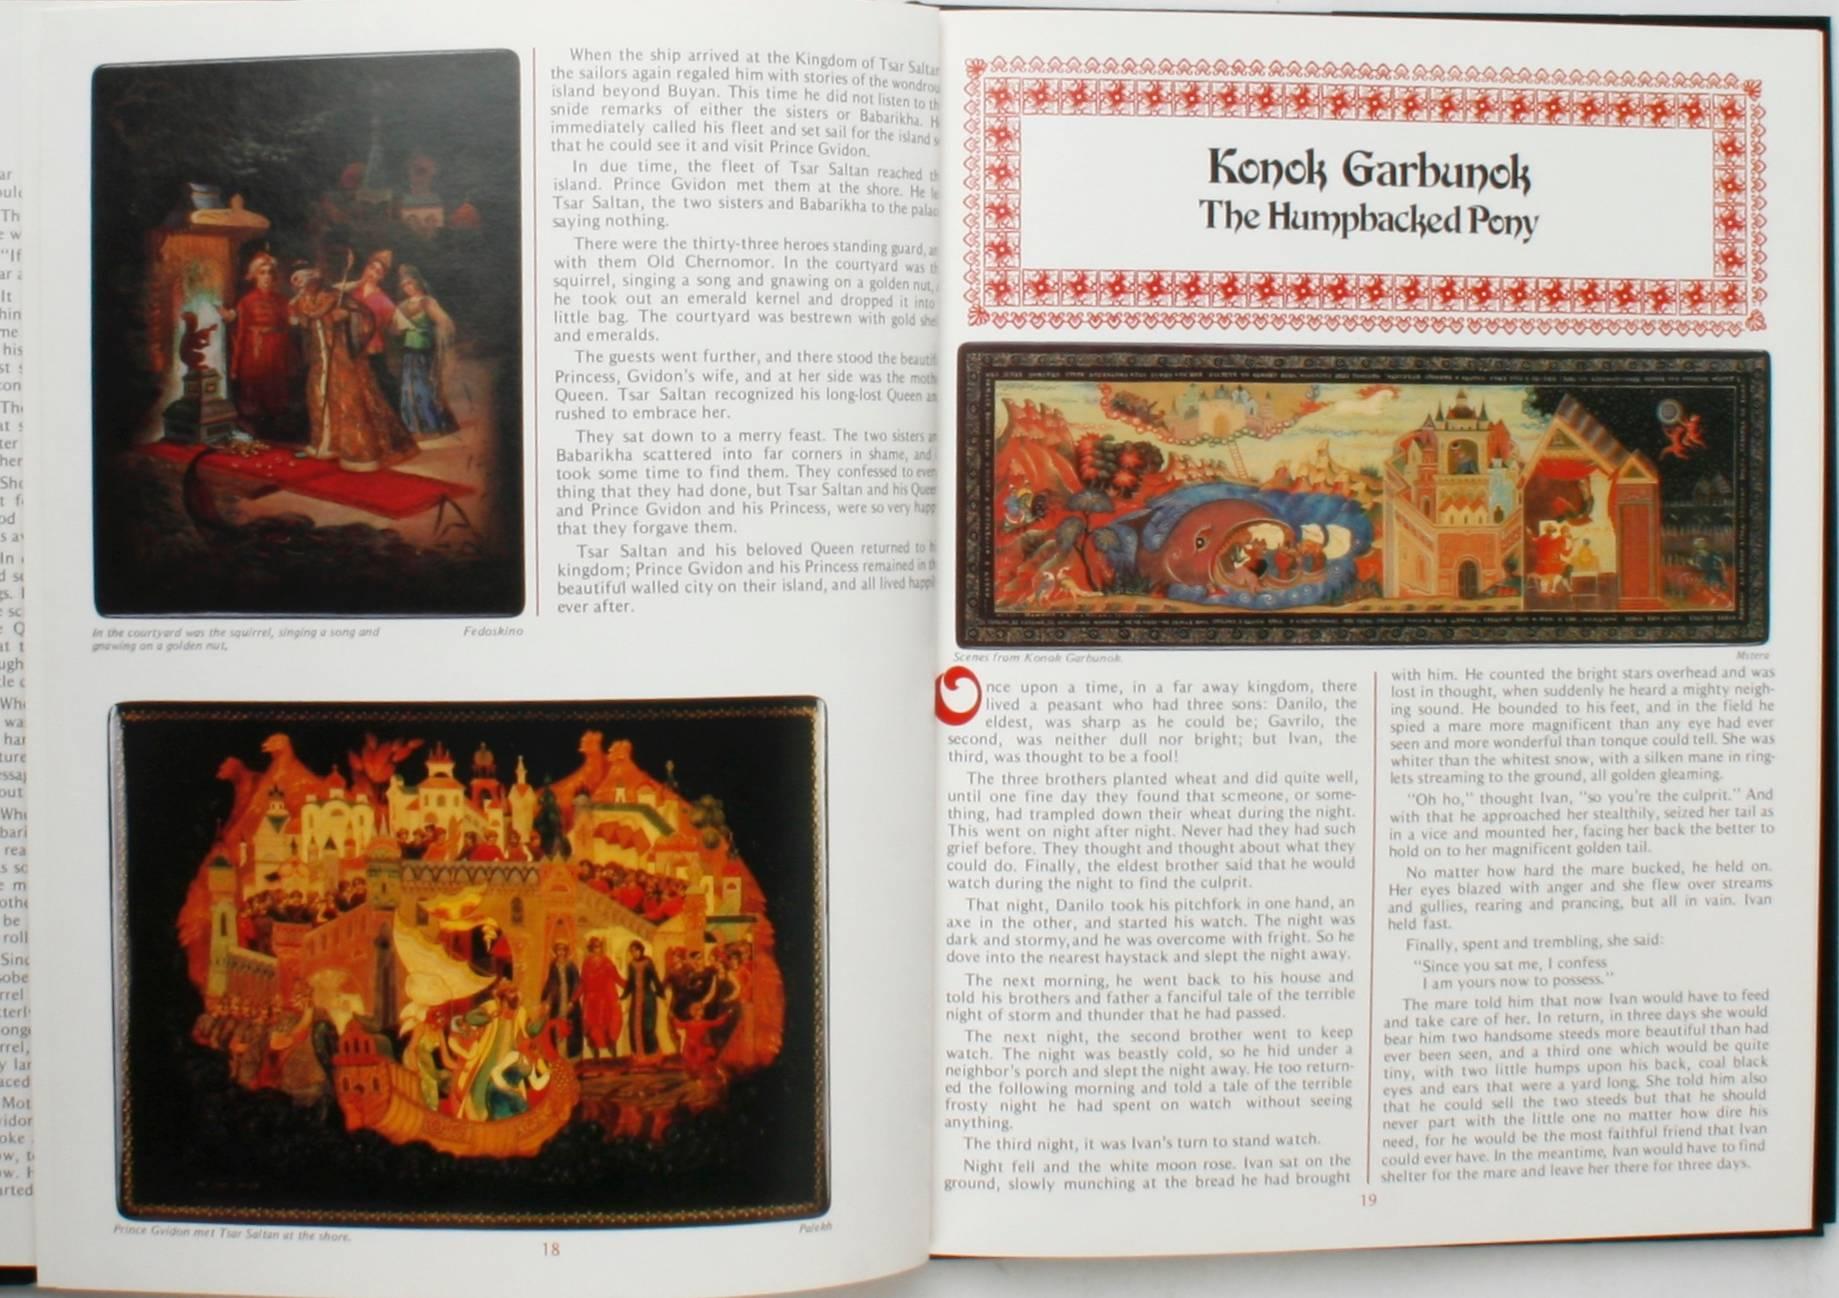 Russian Lacquer, Legends and Fairy Tales Volumes I and II In Excellent Condition In valatie, NY